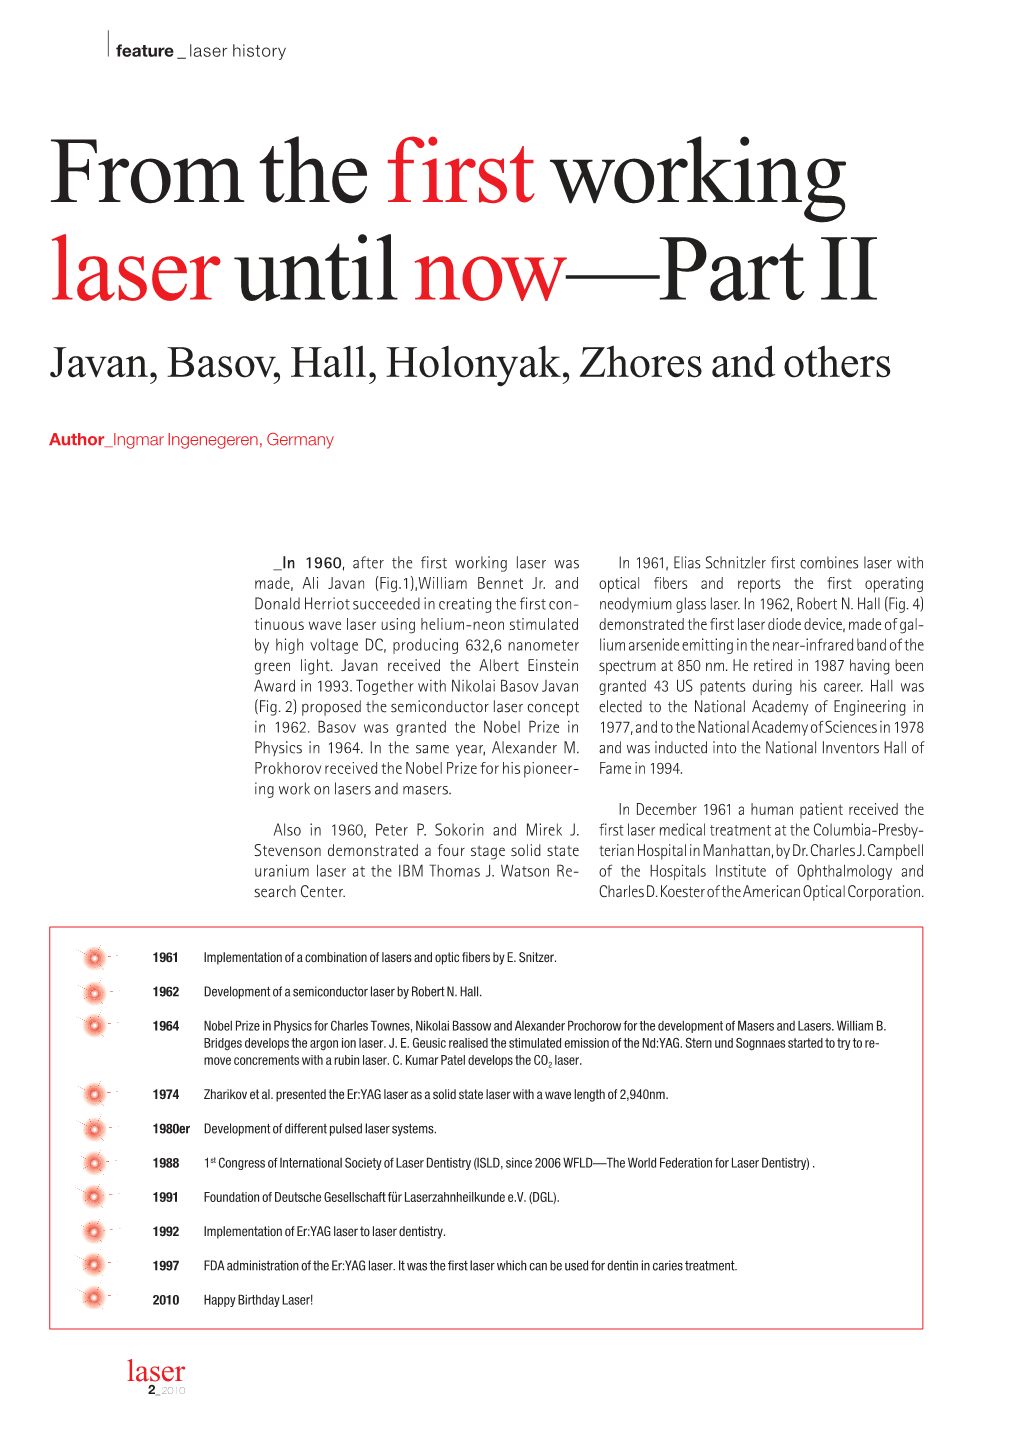 From the First Working Laser Until Now—Part II Javan, Basov, Hall, Holonyak, Zhores and Others